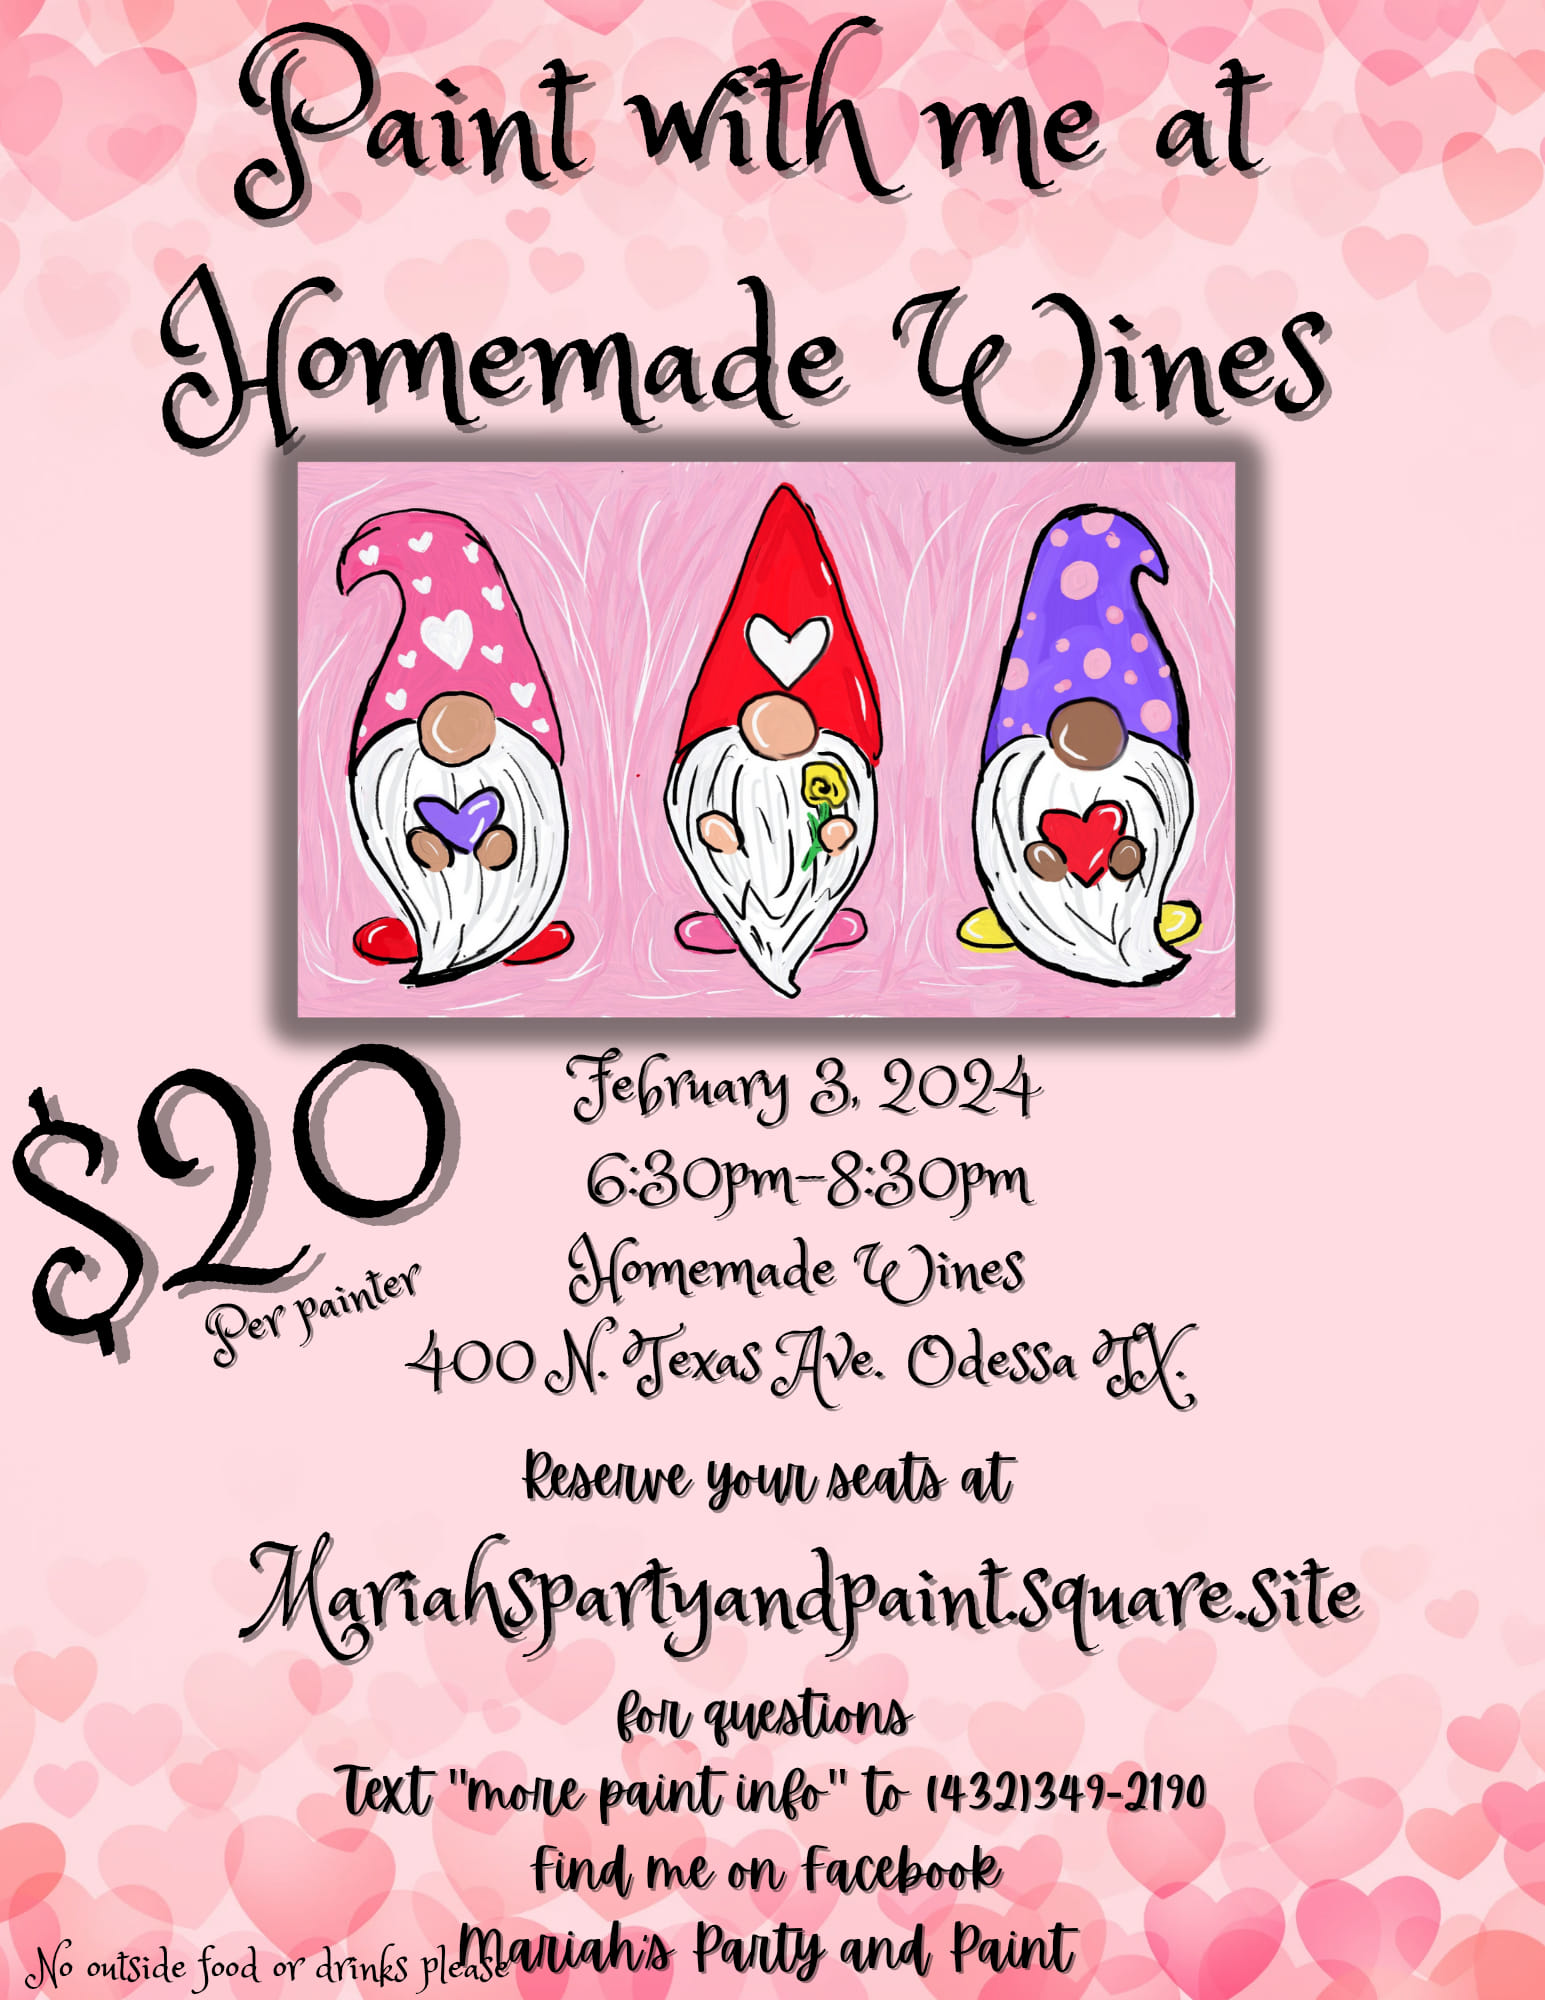 Valentine's Gnome Painting Class at Homemade Wines in Downtown Odessa on February 3, 2024